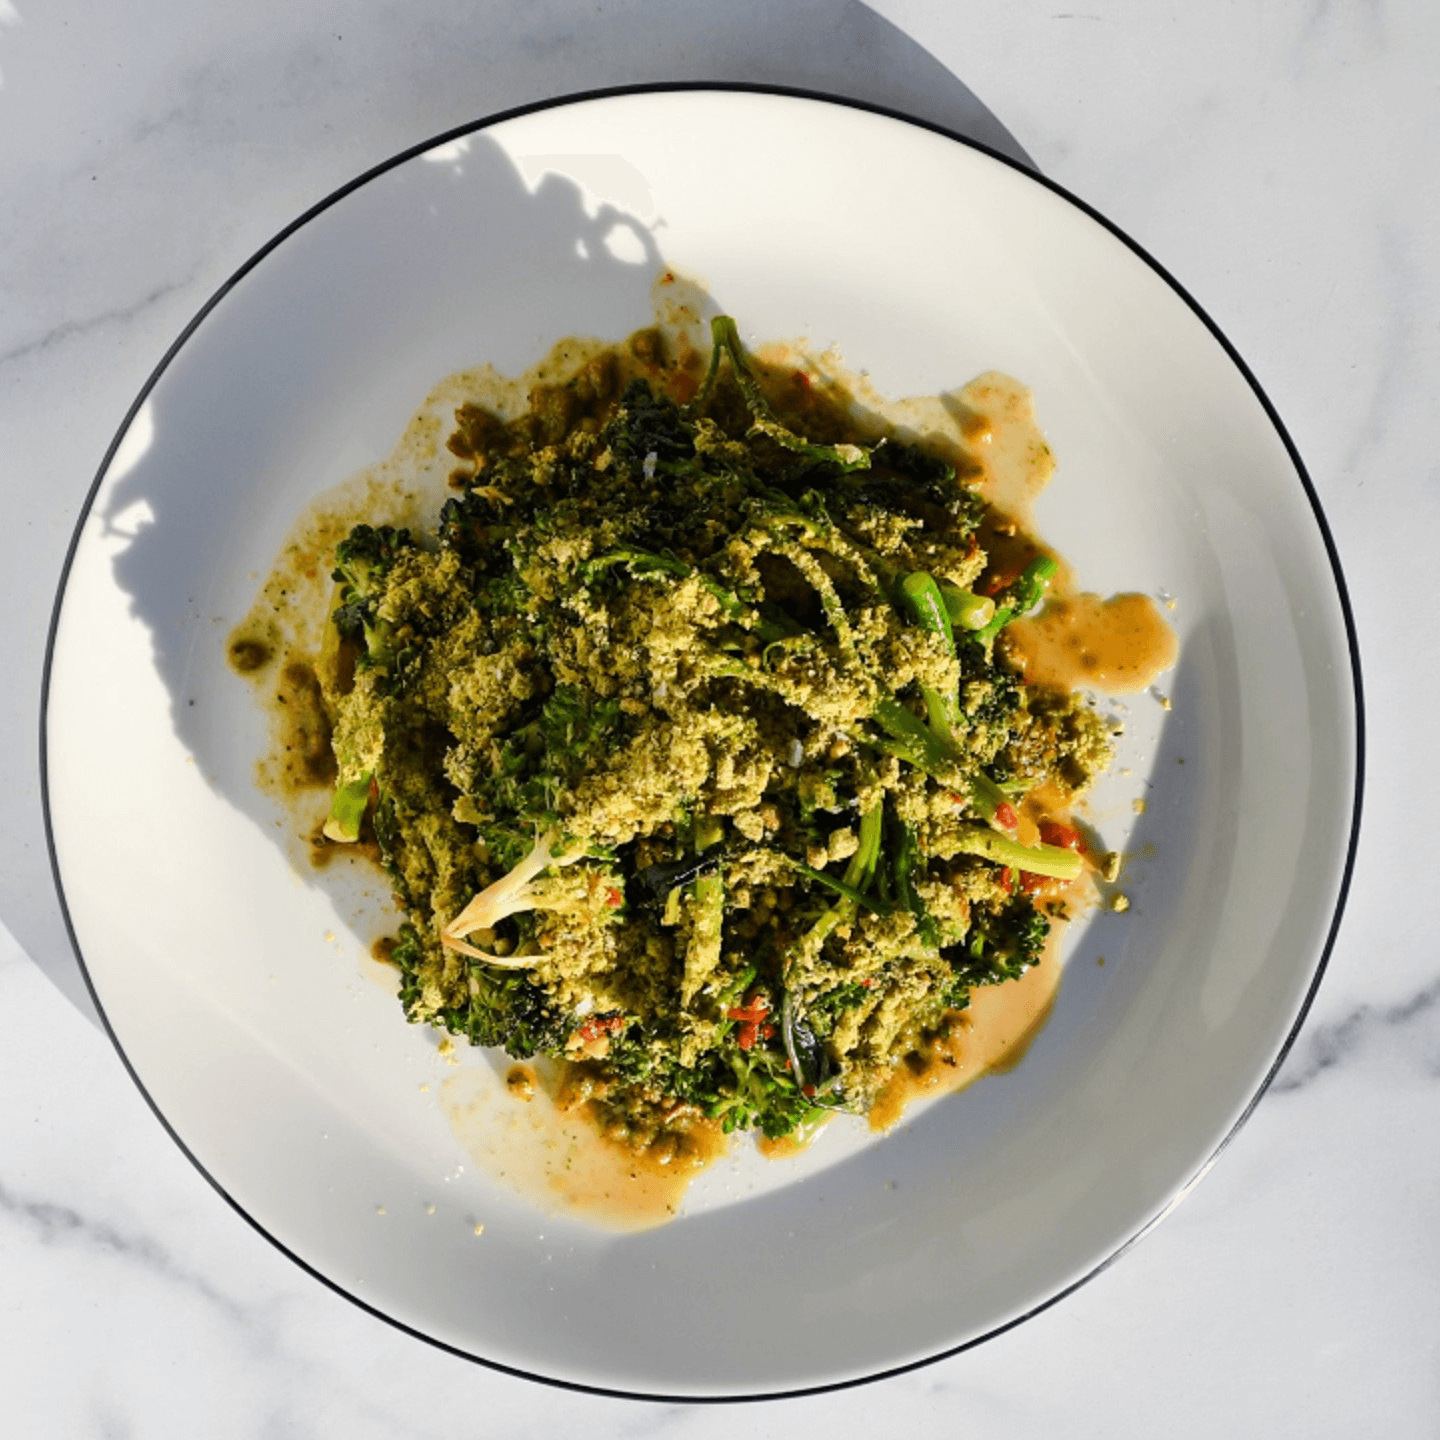 Sprouting Broccoli w/Calabrian Chili Butter